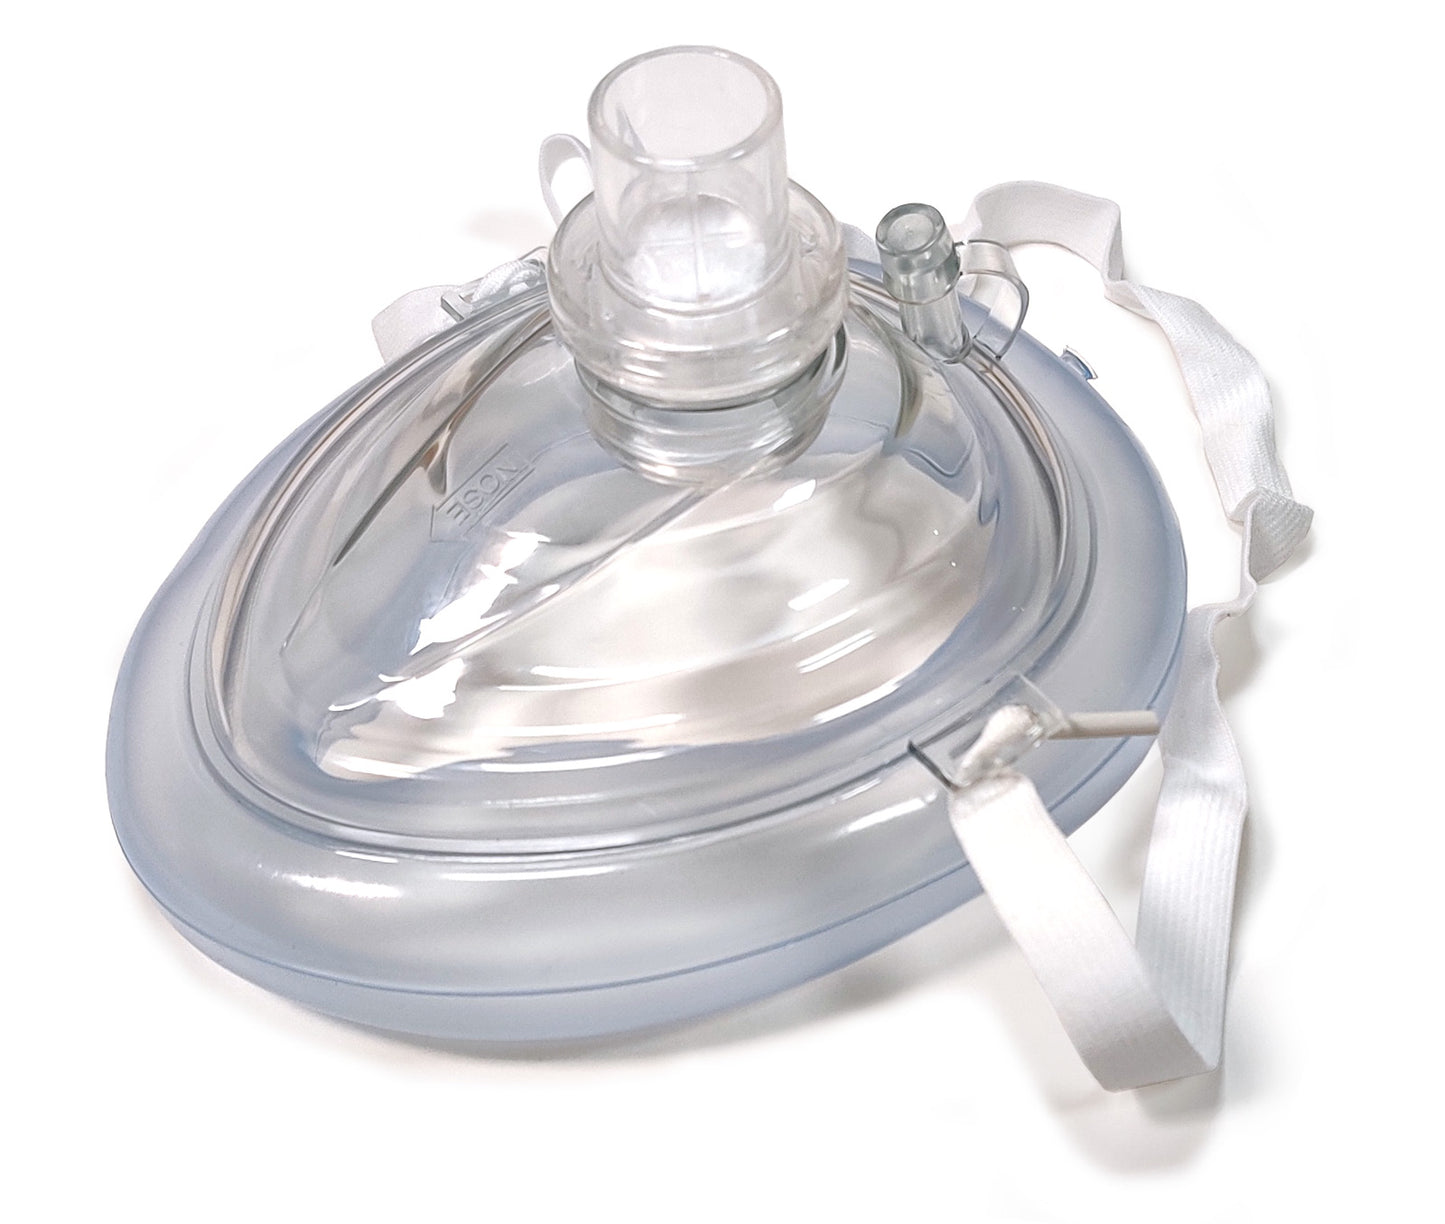 Guard® CPR training mask with one-way filter valve